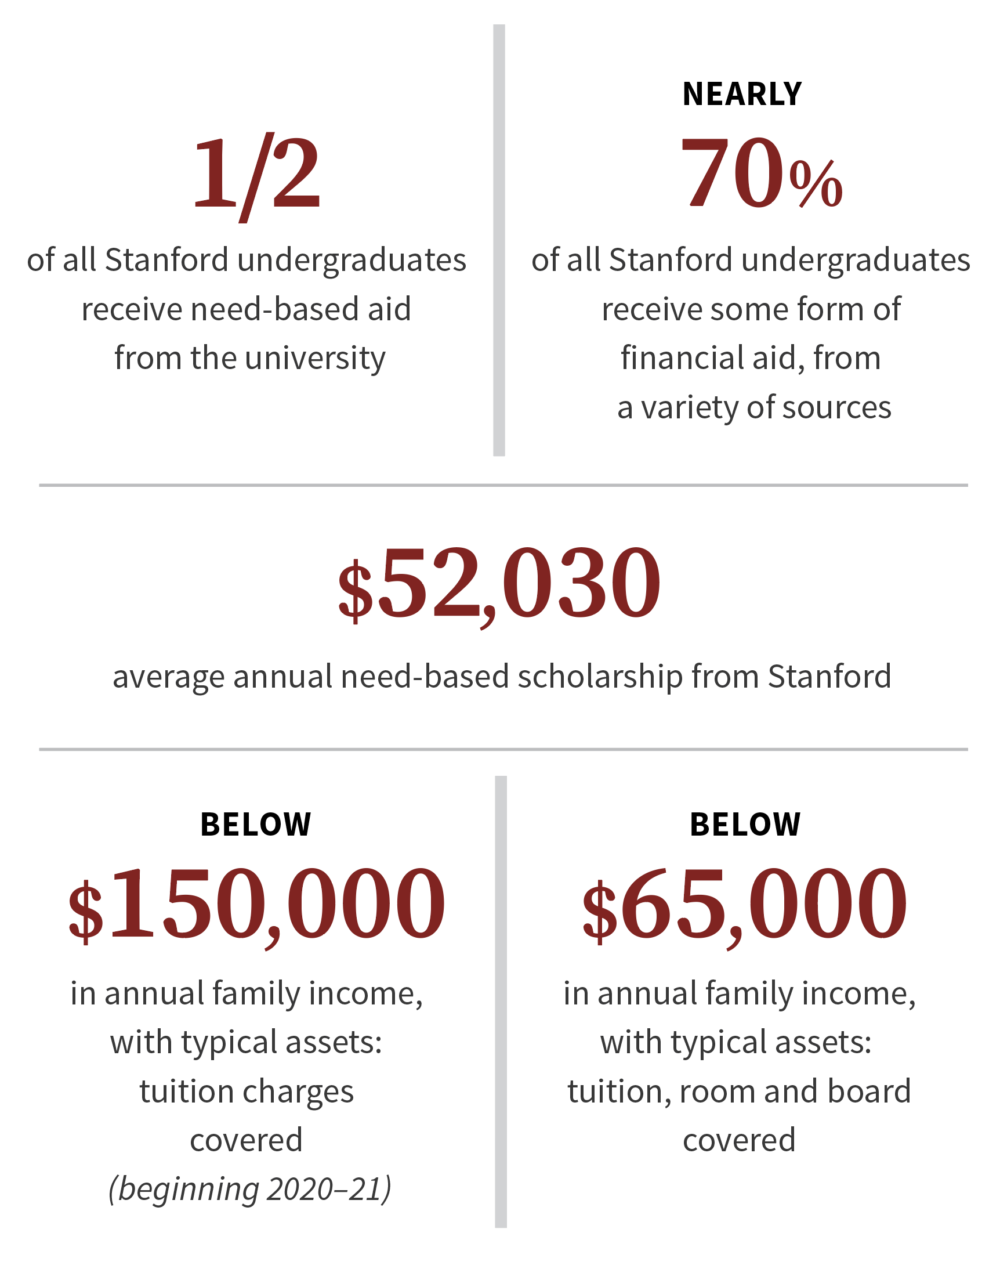 Stanford’s Board of Trustees set 2020-21 tuition levels and expanded undergraduate financial aid for middle-income families.